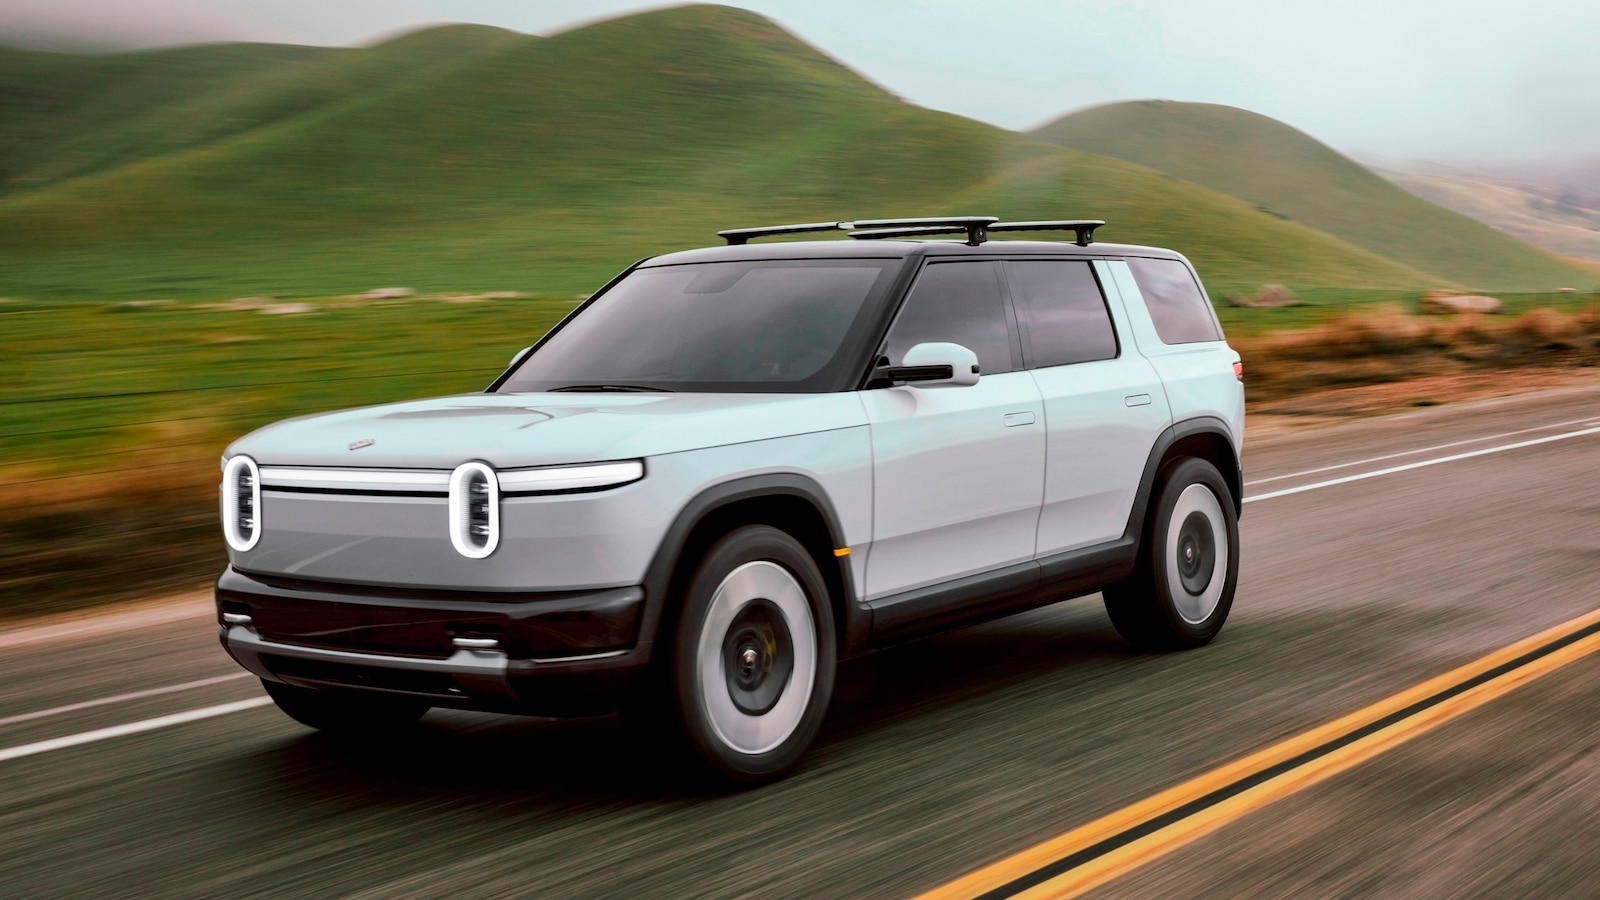 Rivian CEO RJ Scaringe says he’s changing mindsets of what’s ‘possible in an electric vehicle’ [Video]